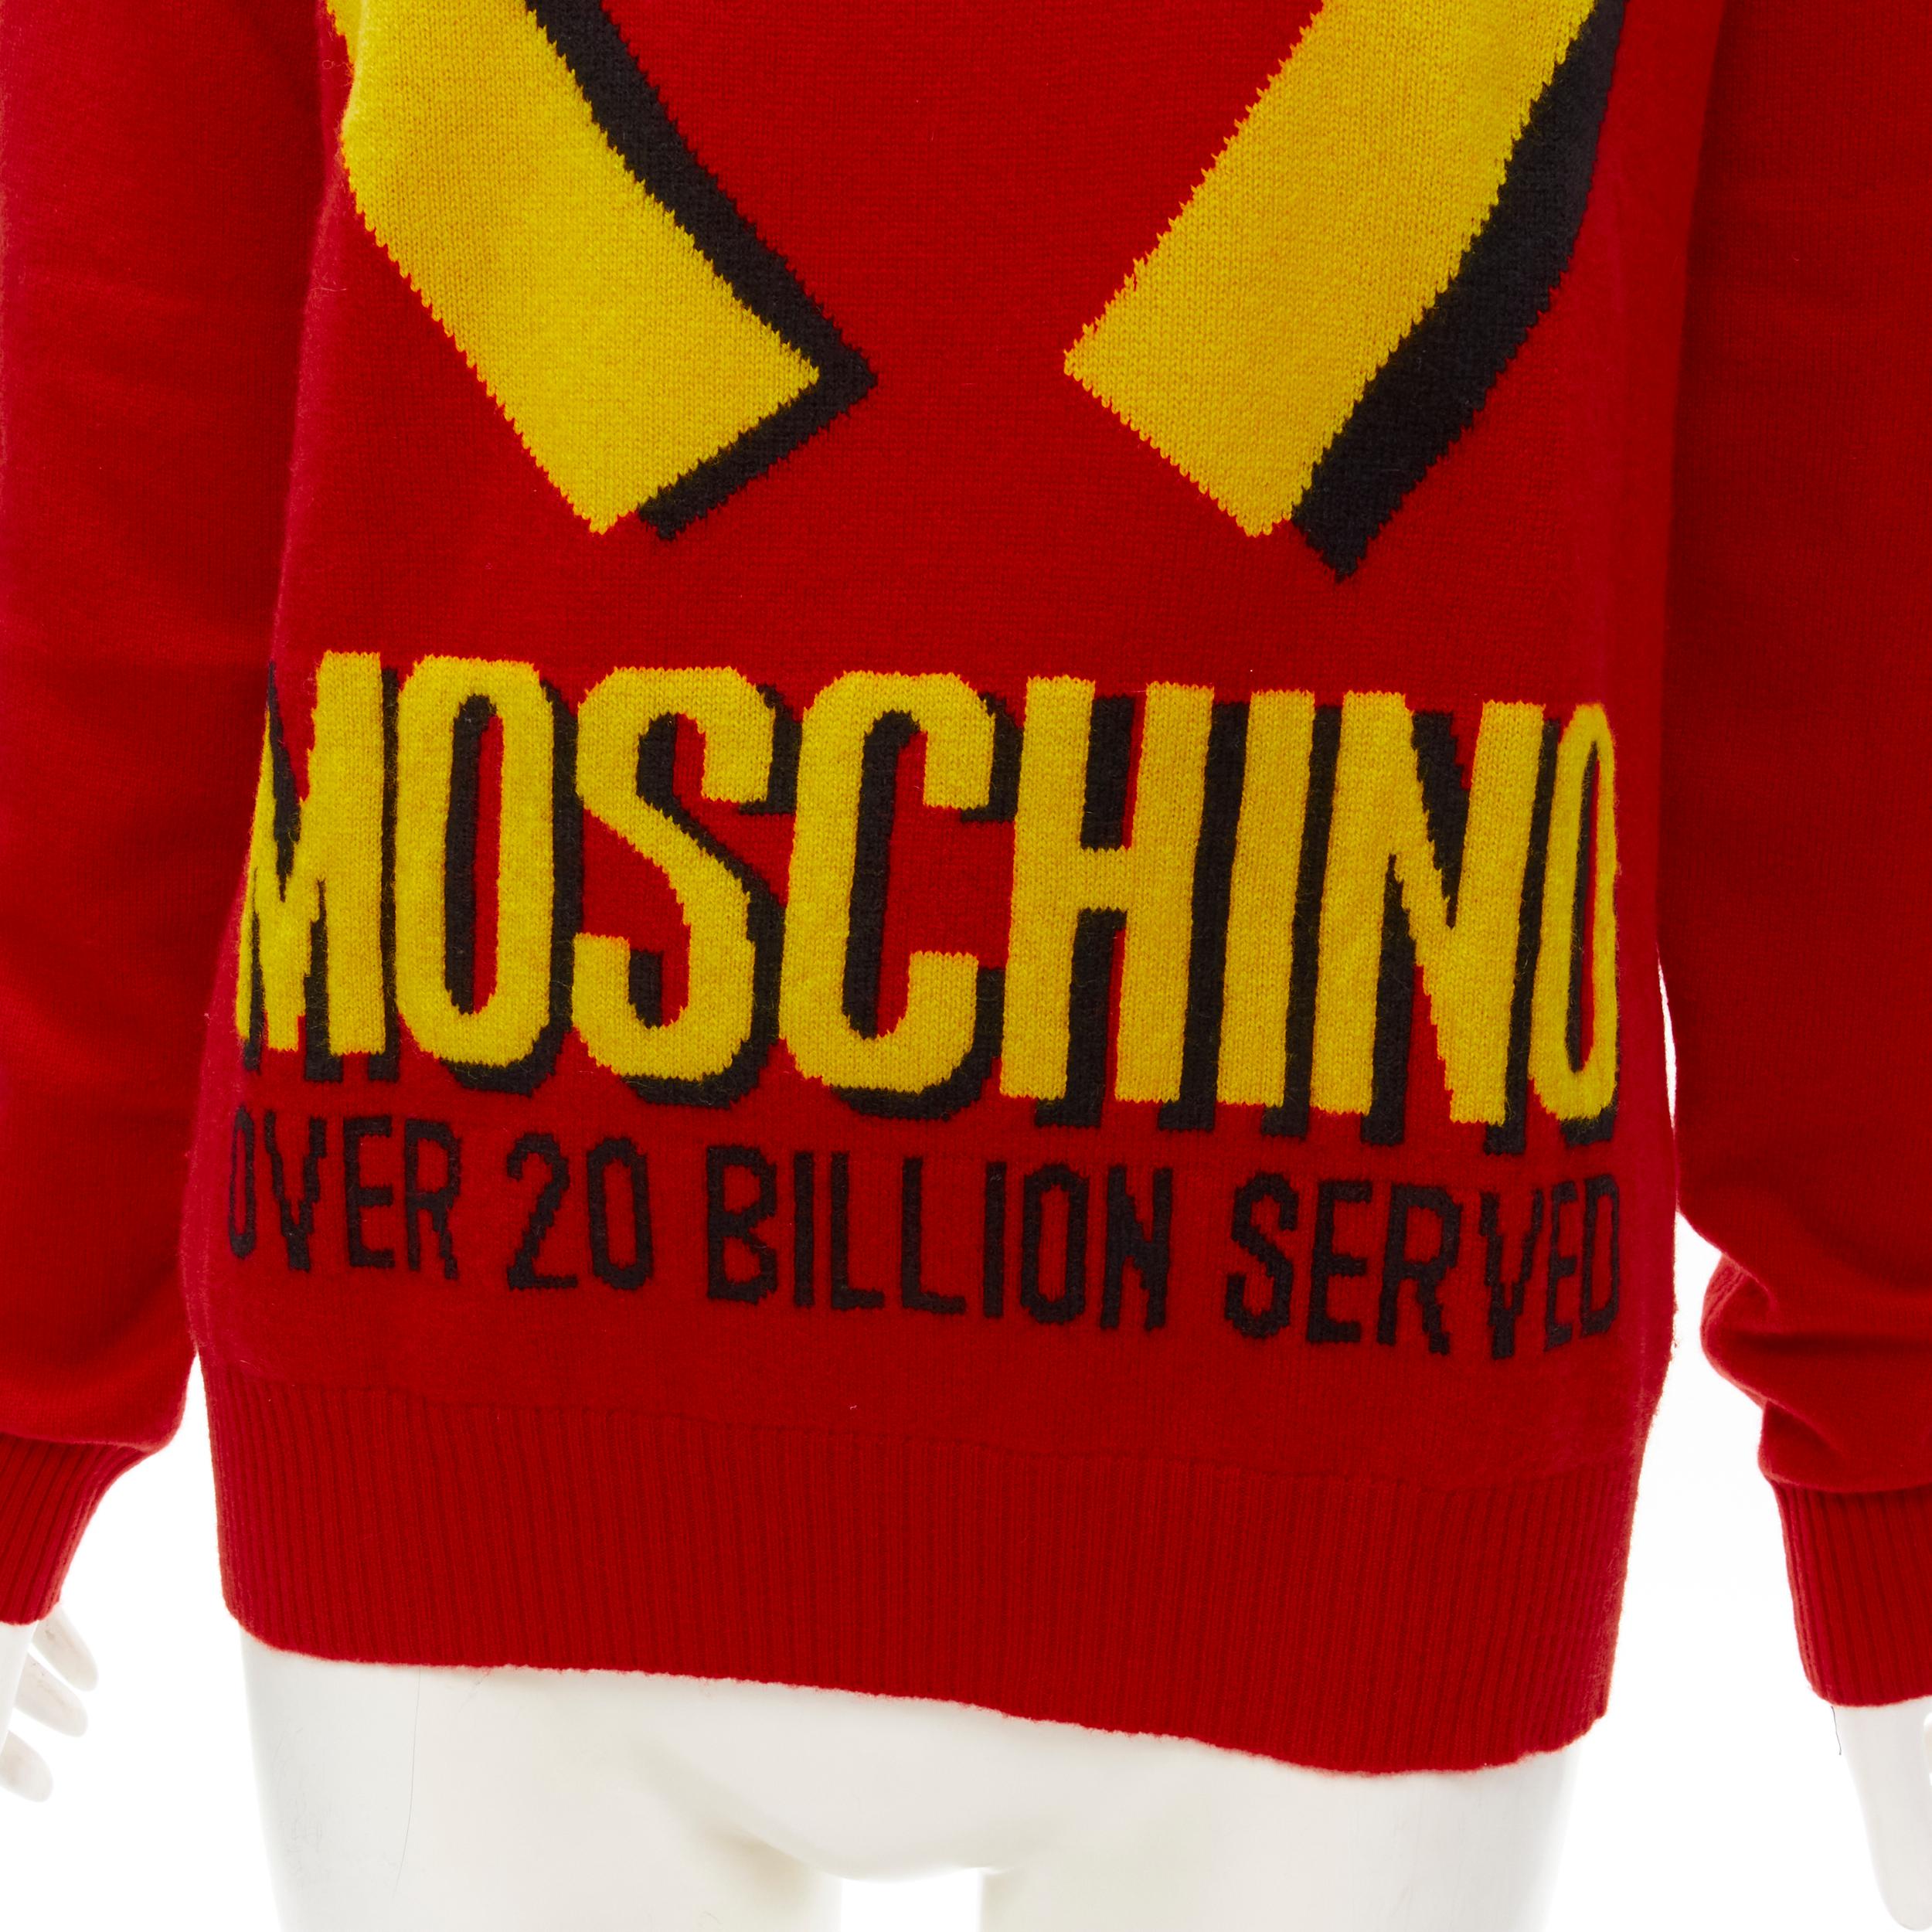 MOSCHINO 2014 Runway Fast Food red yellow McDonalds pullover S
Brand: Moschino
Designer: Jeremy Scott
Collection: 2014 Runway
Material: Feels like wool
Color: Red
Pattern: Logomania
Extra Detail: Fast food inspired graphic logo. Dropped shoulder